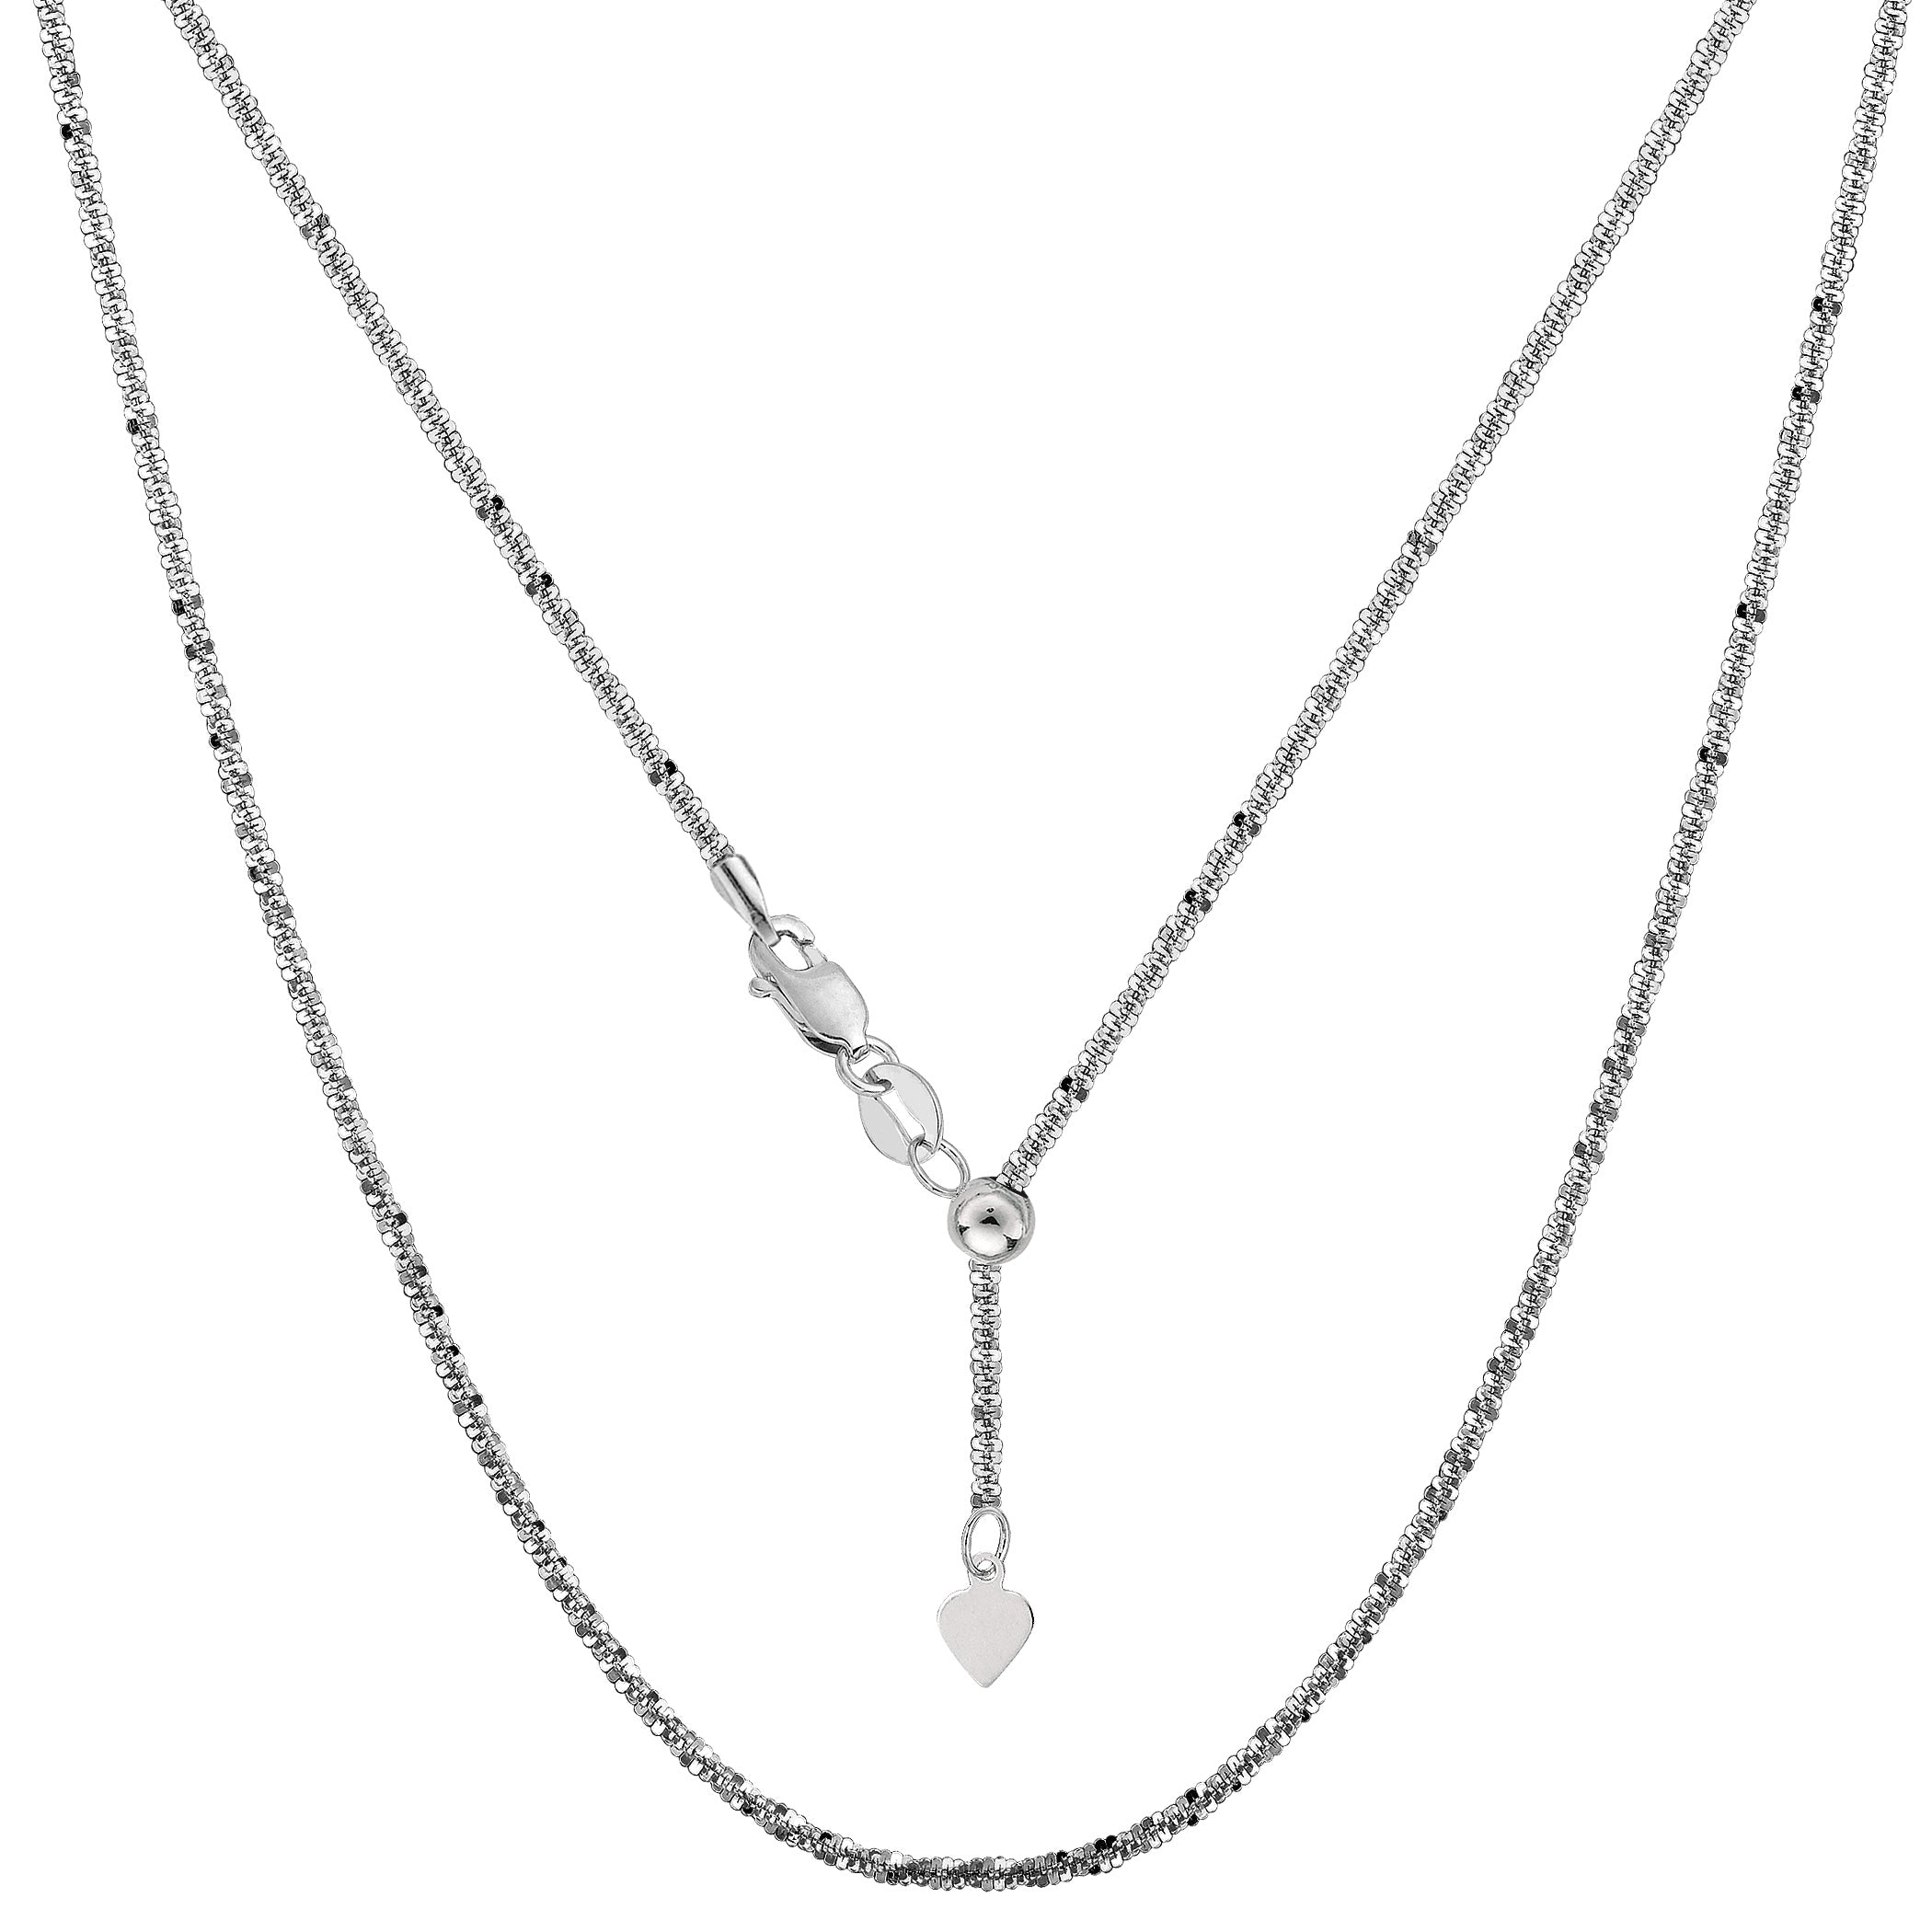 10k White Gold Adjustable Sparkle Link Chain Necklace, 1.5mm, 22" fine designer jewelry for men and women